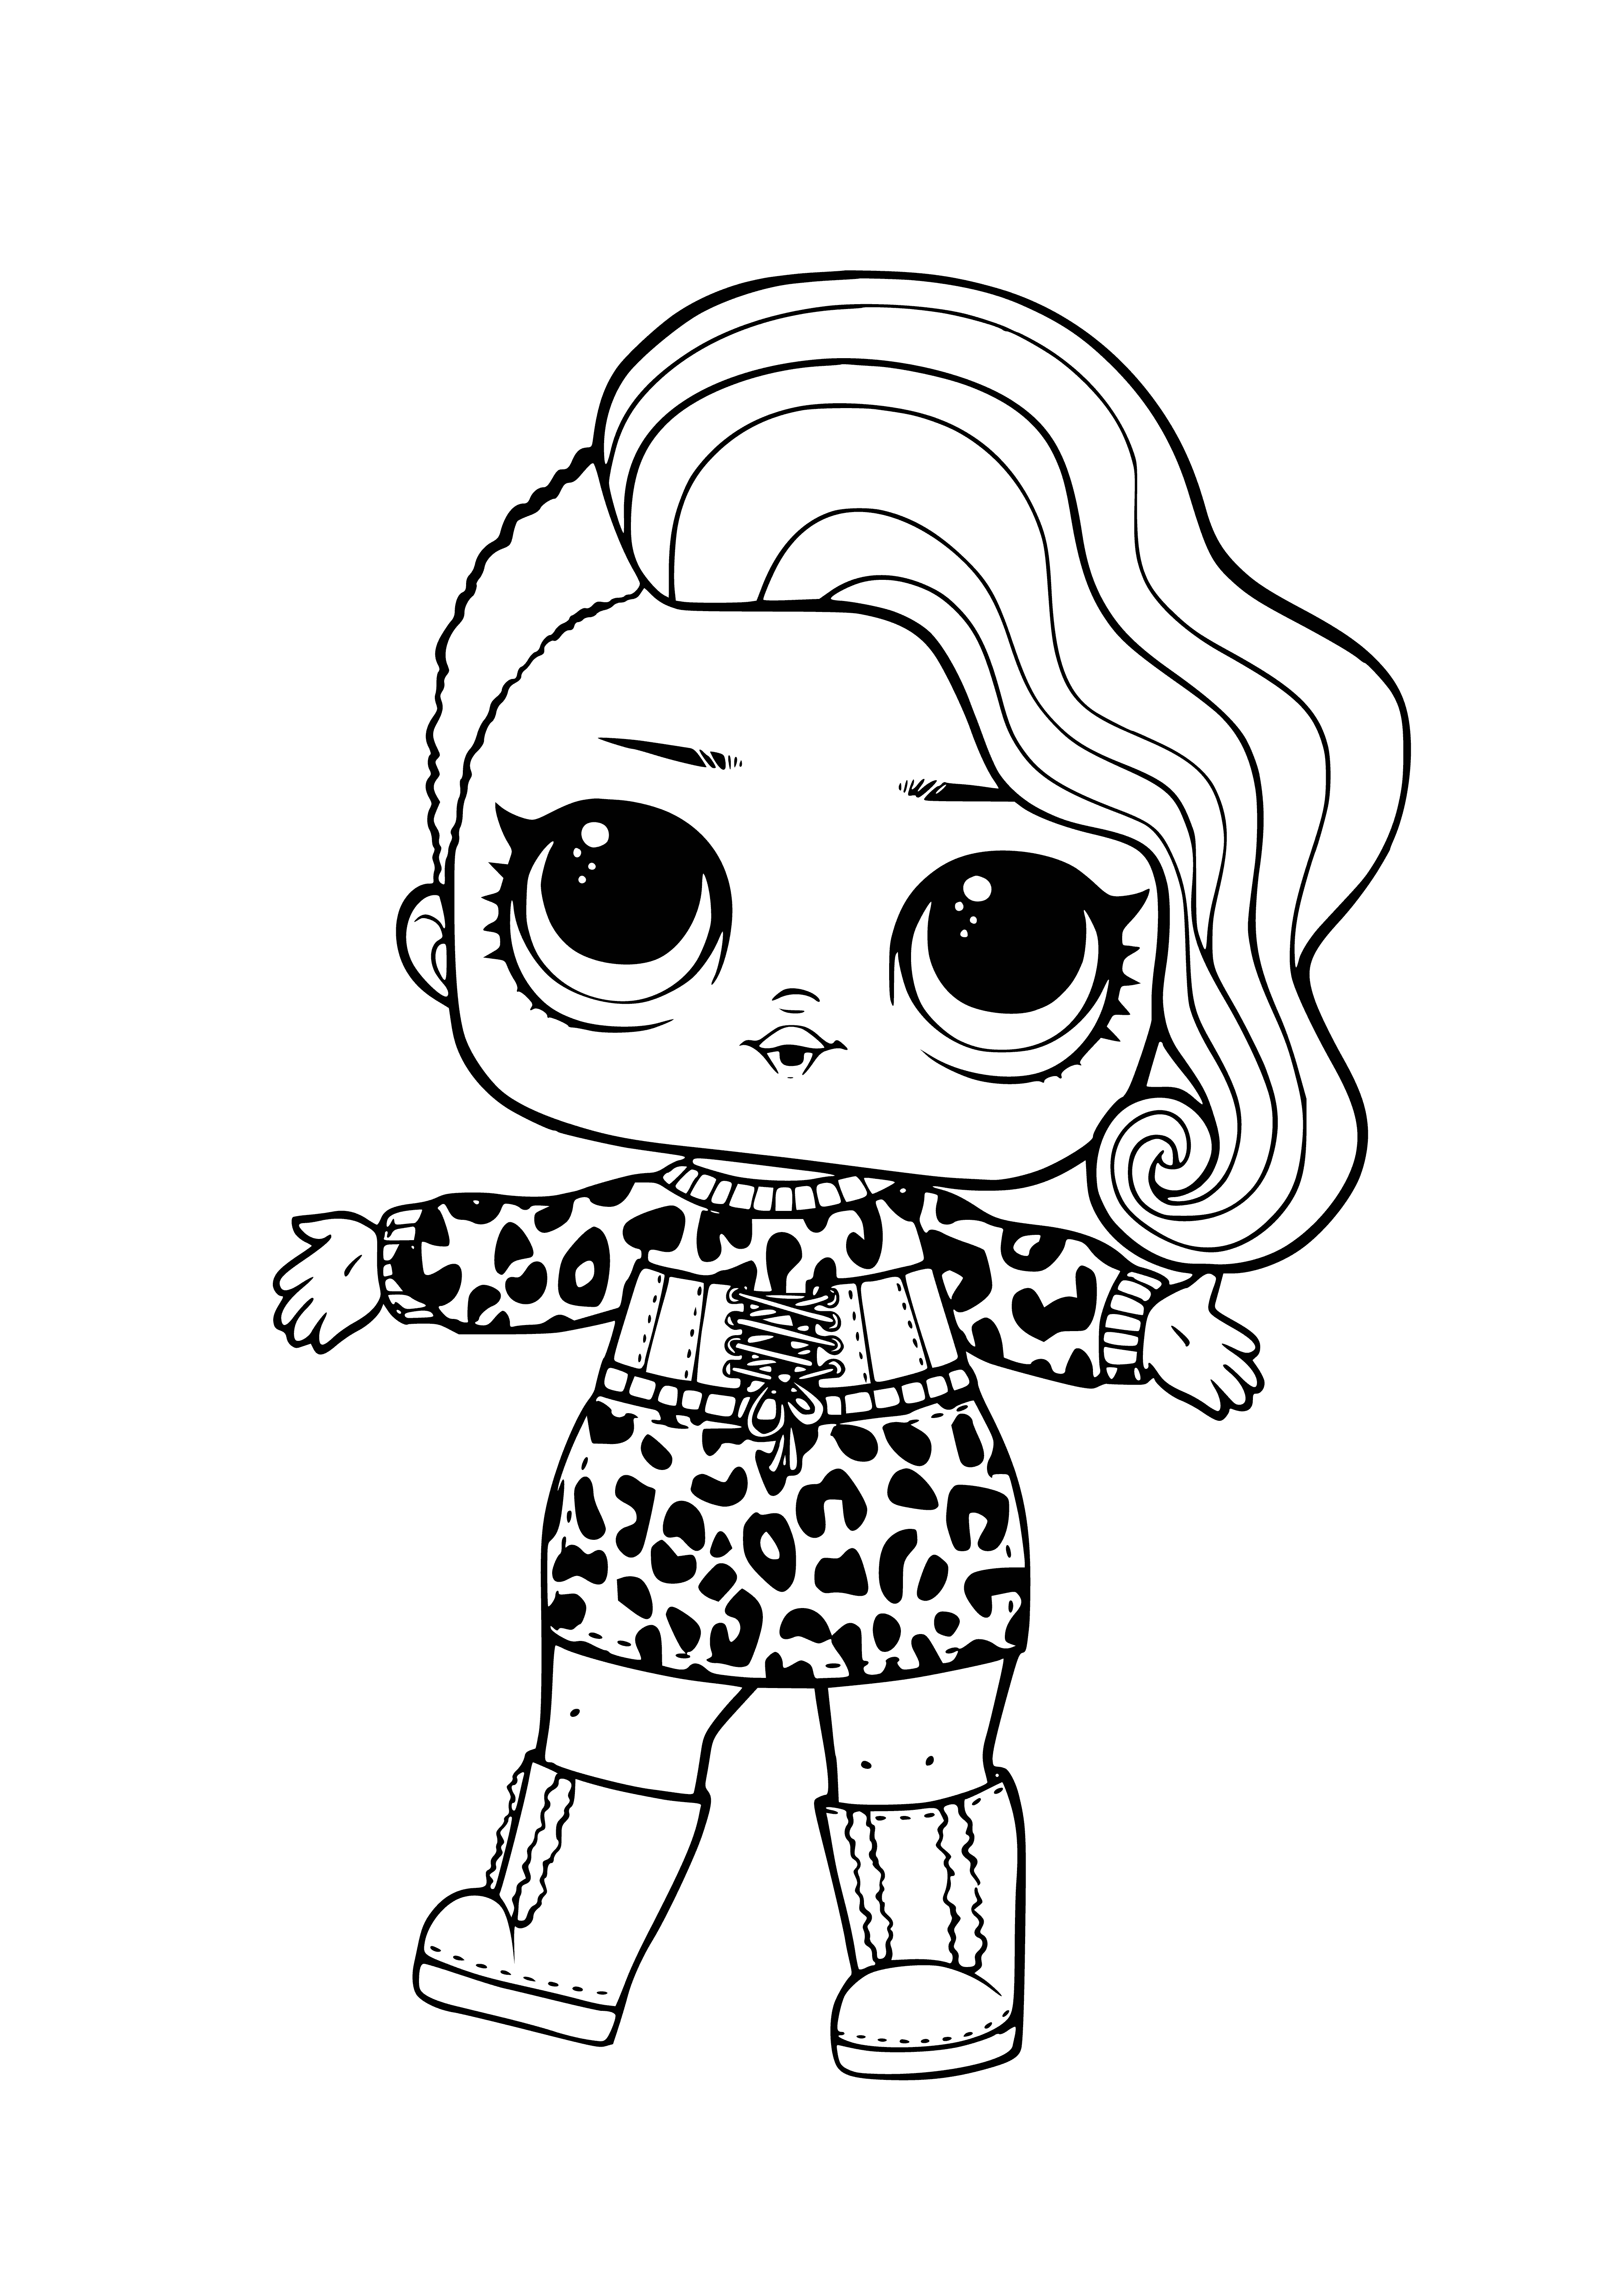 coloring page: Leopard with white fur & black spots calmly stares into camera, lying still on the ground with its long tail curling around it.